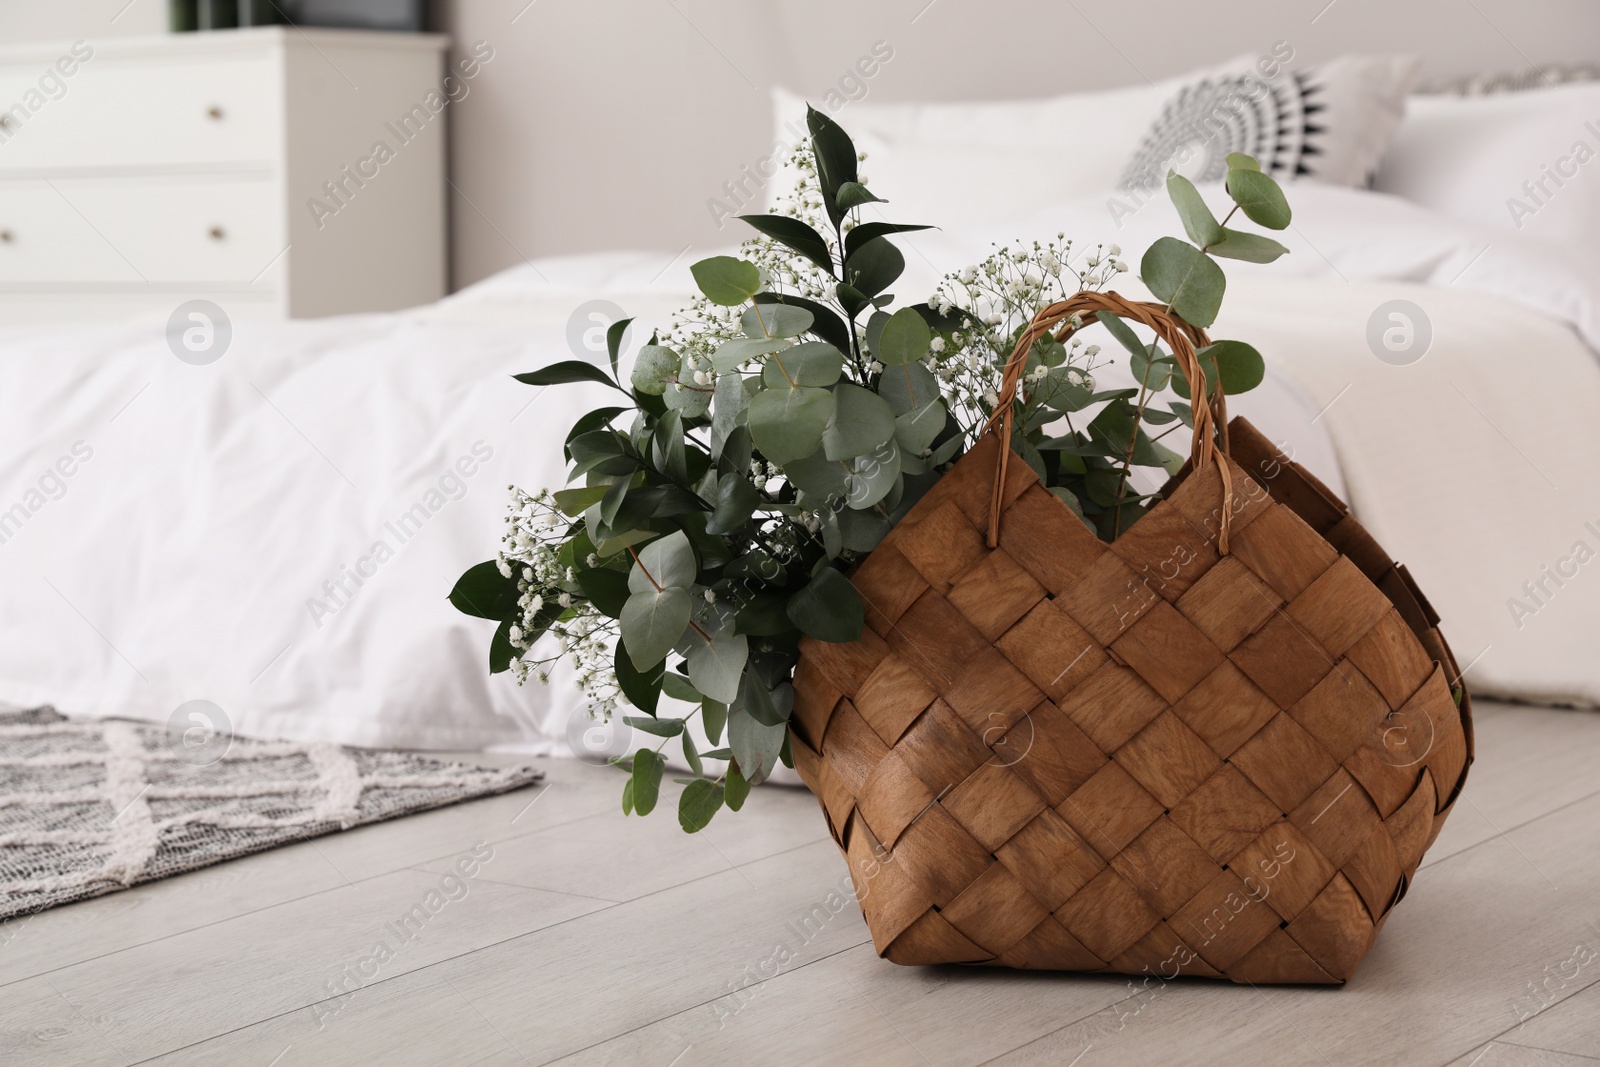 Photo of Stylish wicker basket with fresh eucalyptus branches and flowers on floor in bedroom